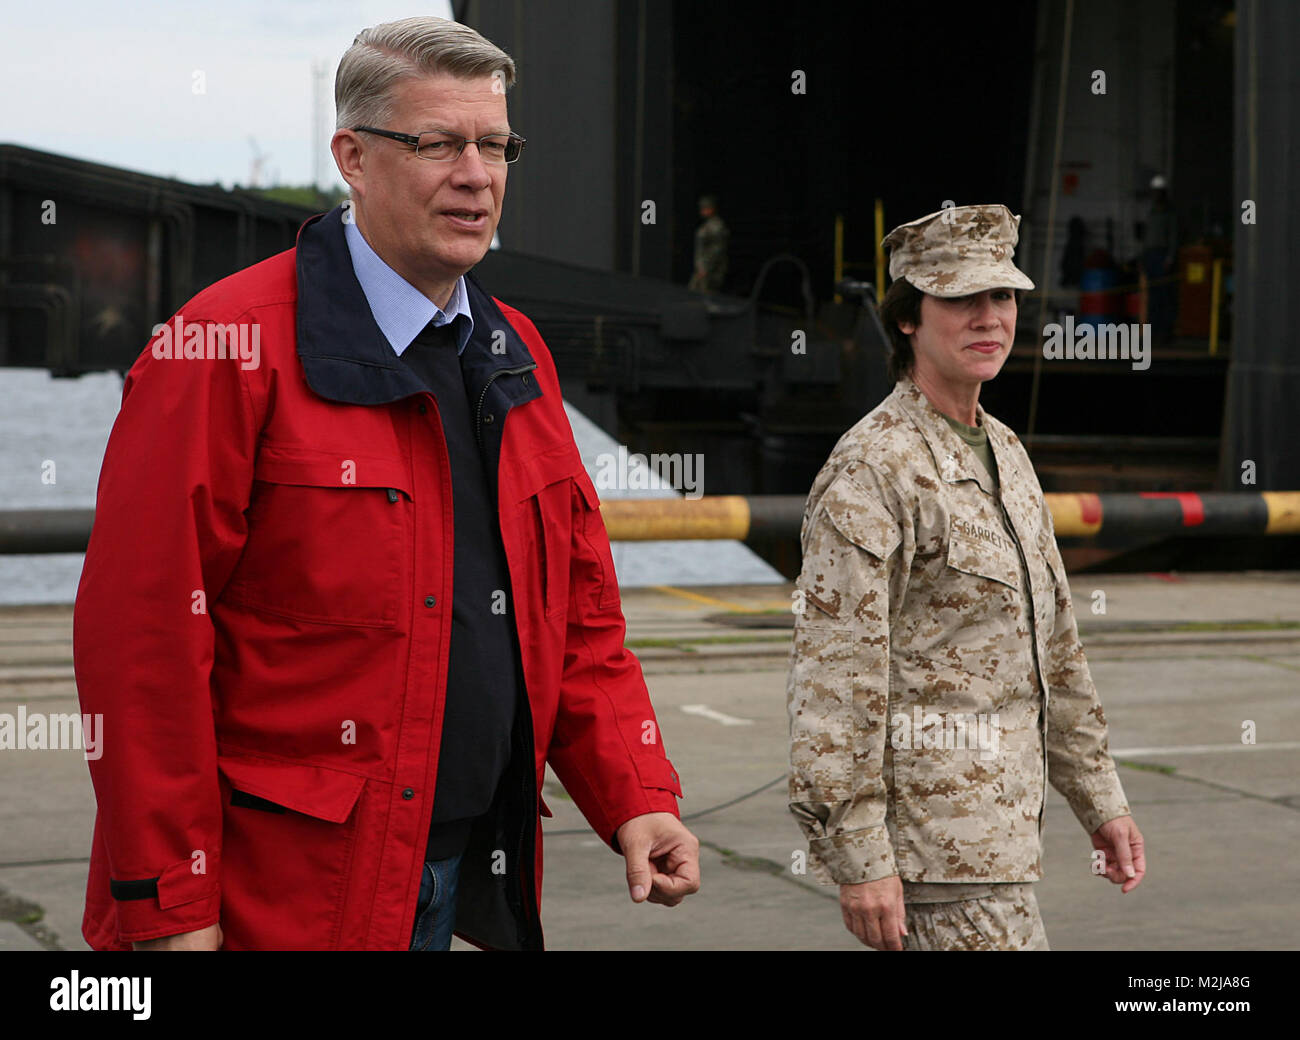 Latvian President Valdis Zatlers (left) walks with Maj. Gen. (sel.) Tracy L. Garrett, commanding general of the 4th Marine Logistics Group, prior to a distinguished visitor event at several sites around the exercise Baltic Operations 2010 training areas. Since the start the exercise on June 6th, the Marines and Sailors of 4th Landing Support Battalion and Naval Beach Group 2 have been working with members of the Armed Forces of Latvia to conduct maritime preposition force offload operations here. Latvian president walks with Marine major by EUCOM Stock Photo